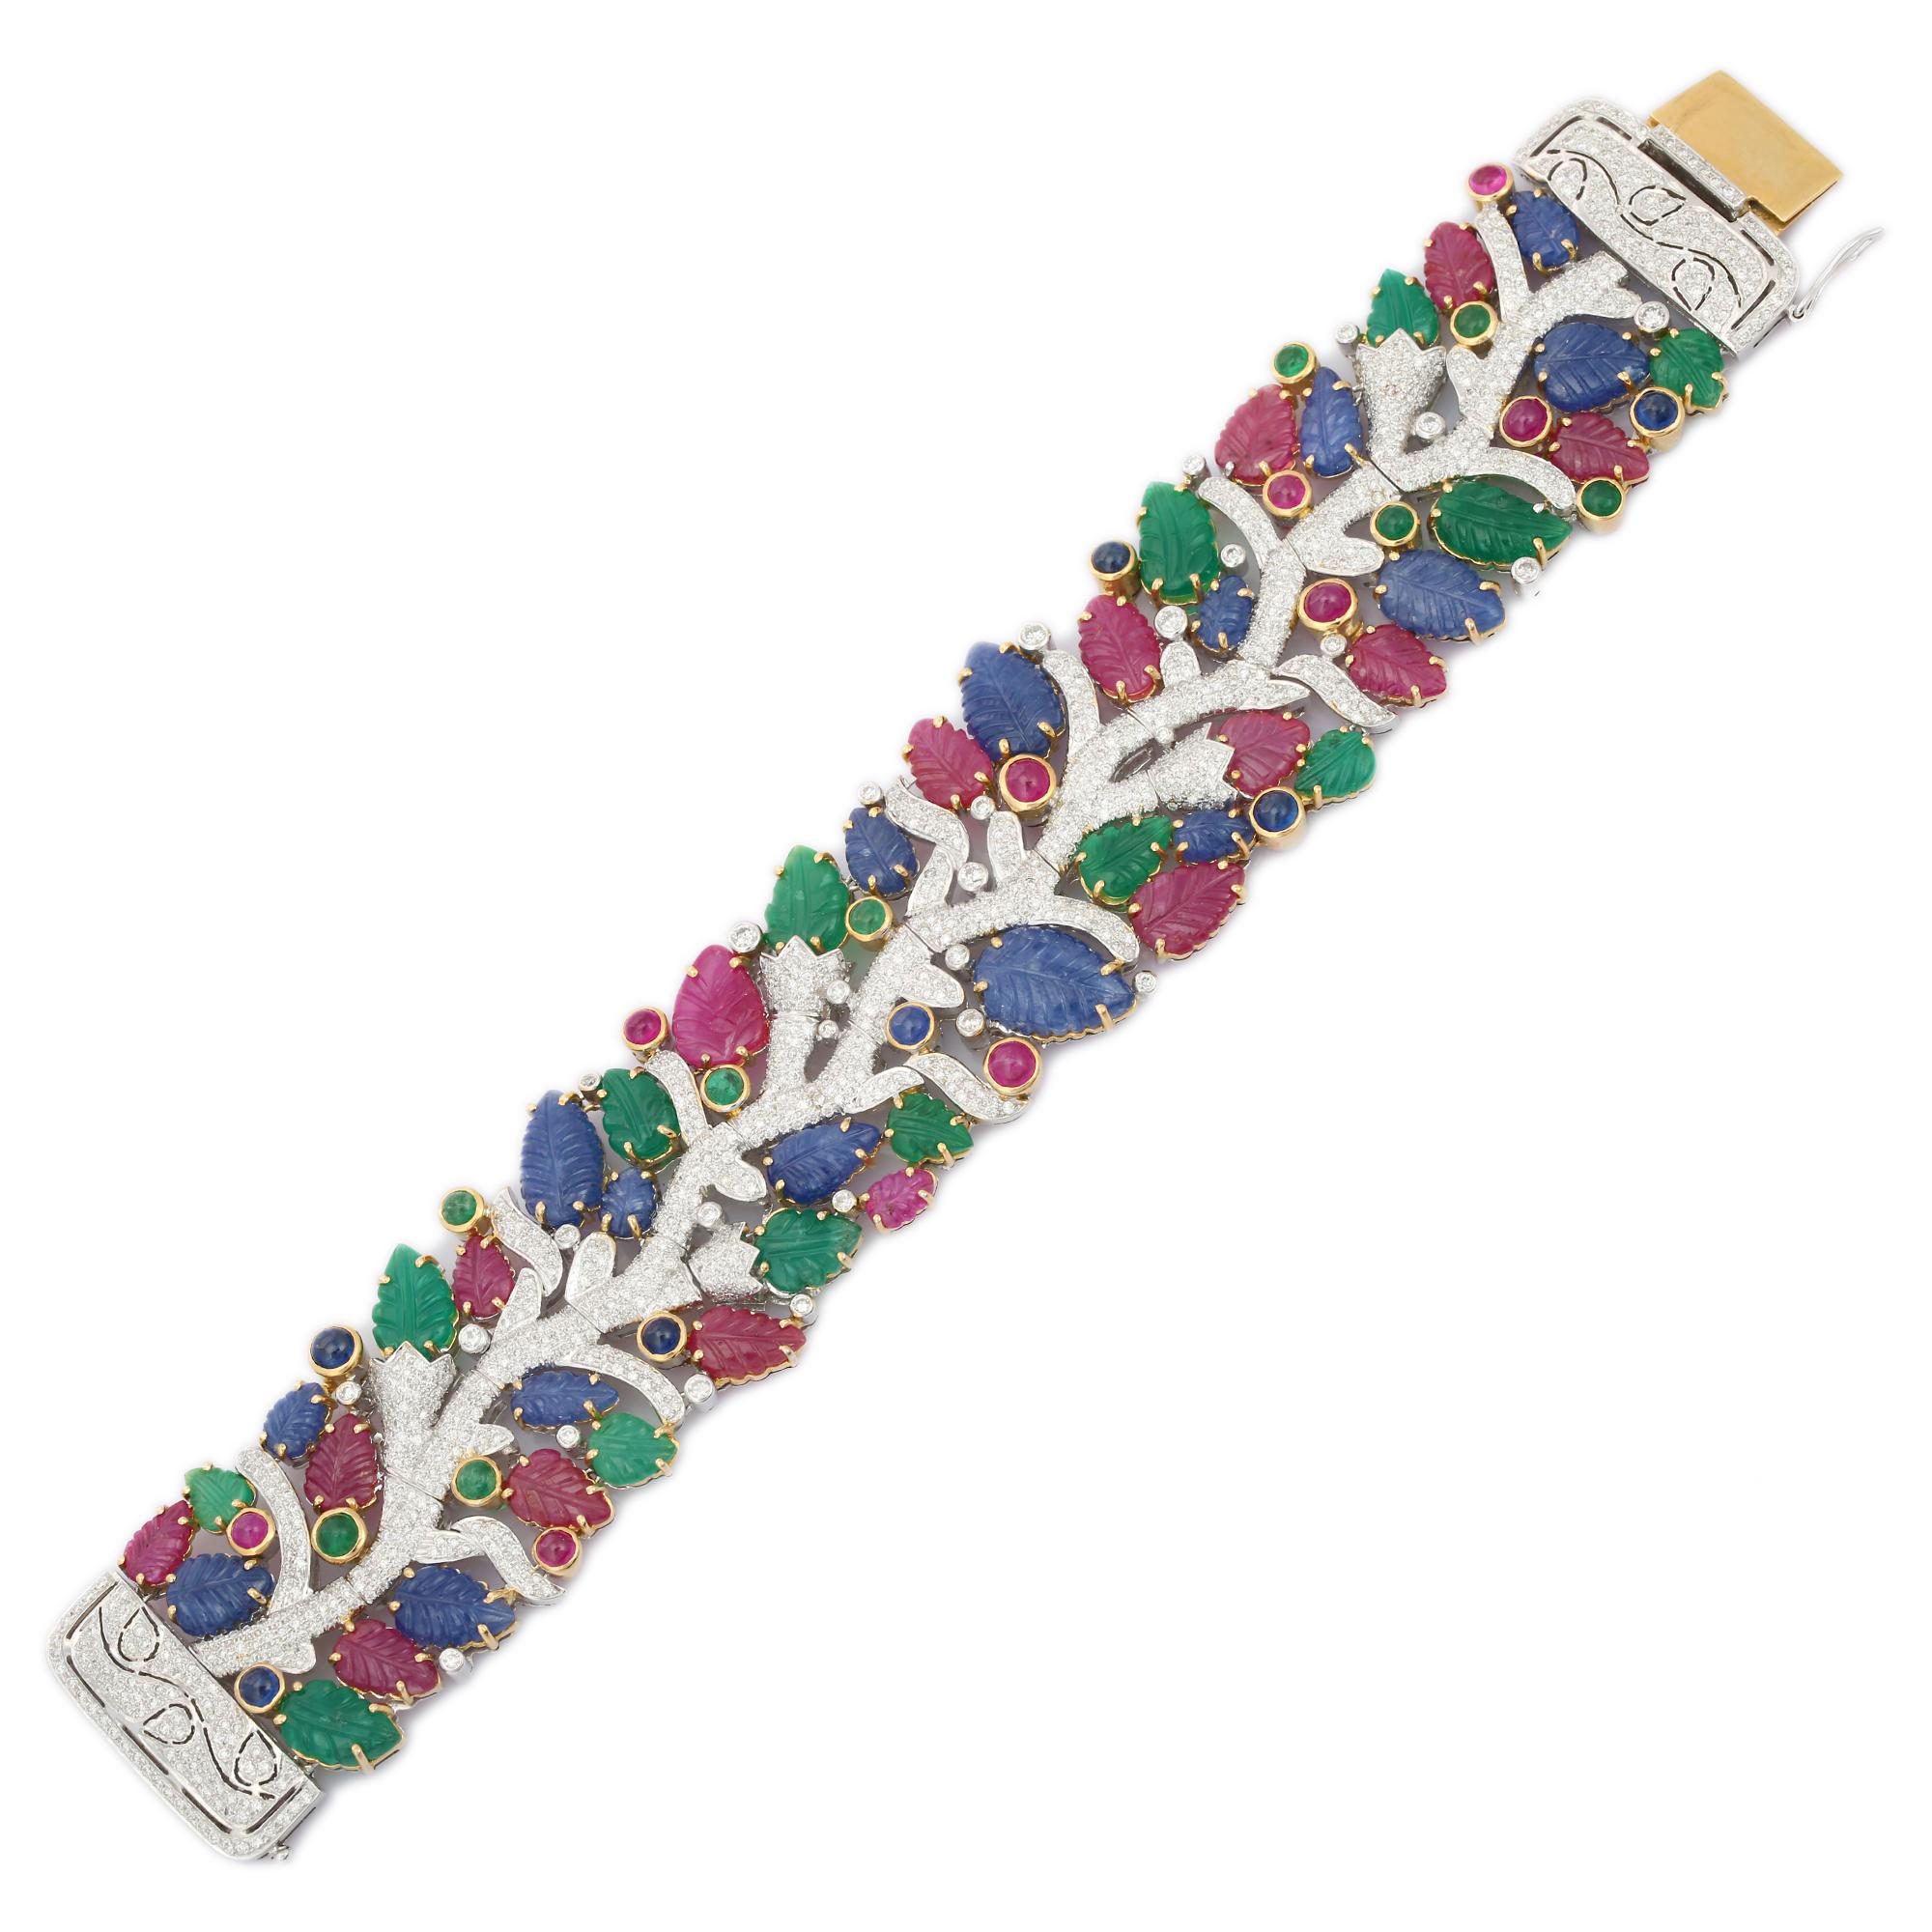 This Statement 68.50 ct Emerald Ruby Sapphire Bracelet in 18K gold showcases 71 endlessly sparkling natural emerald, ruby and sapphire weighing 68.5 carat. It measures 7.5 inches long in length. 
Emerald enhances the intellectual capacity of the